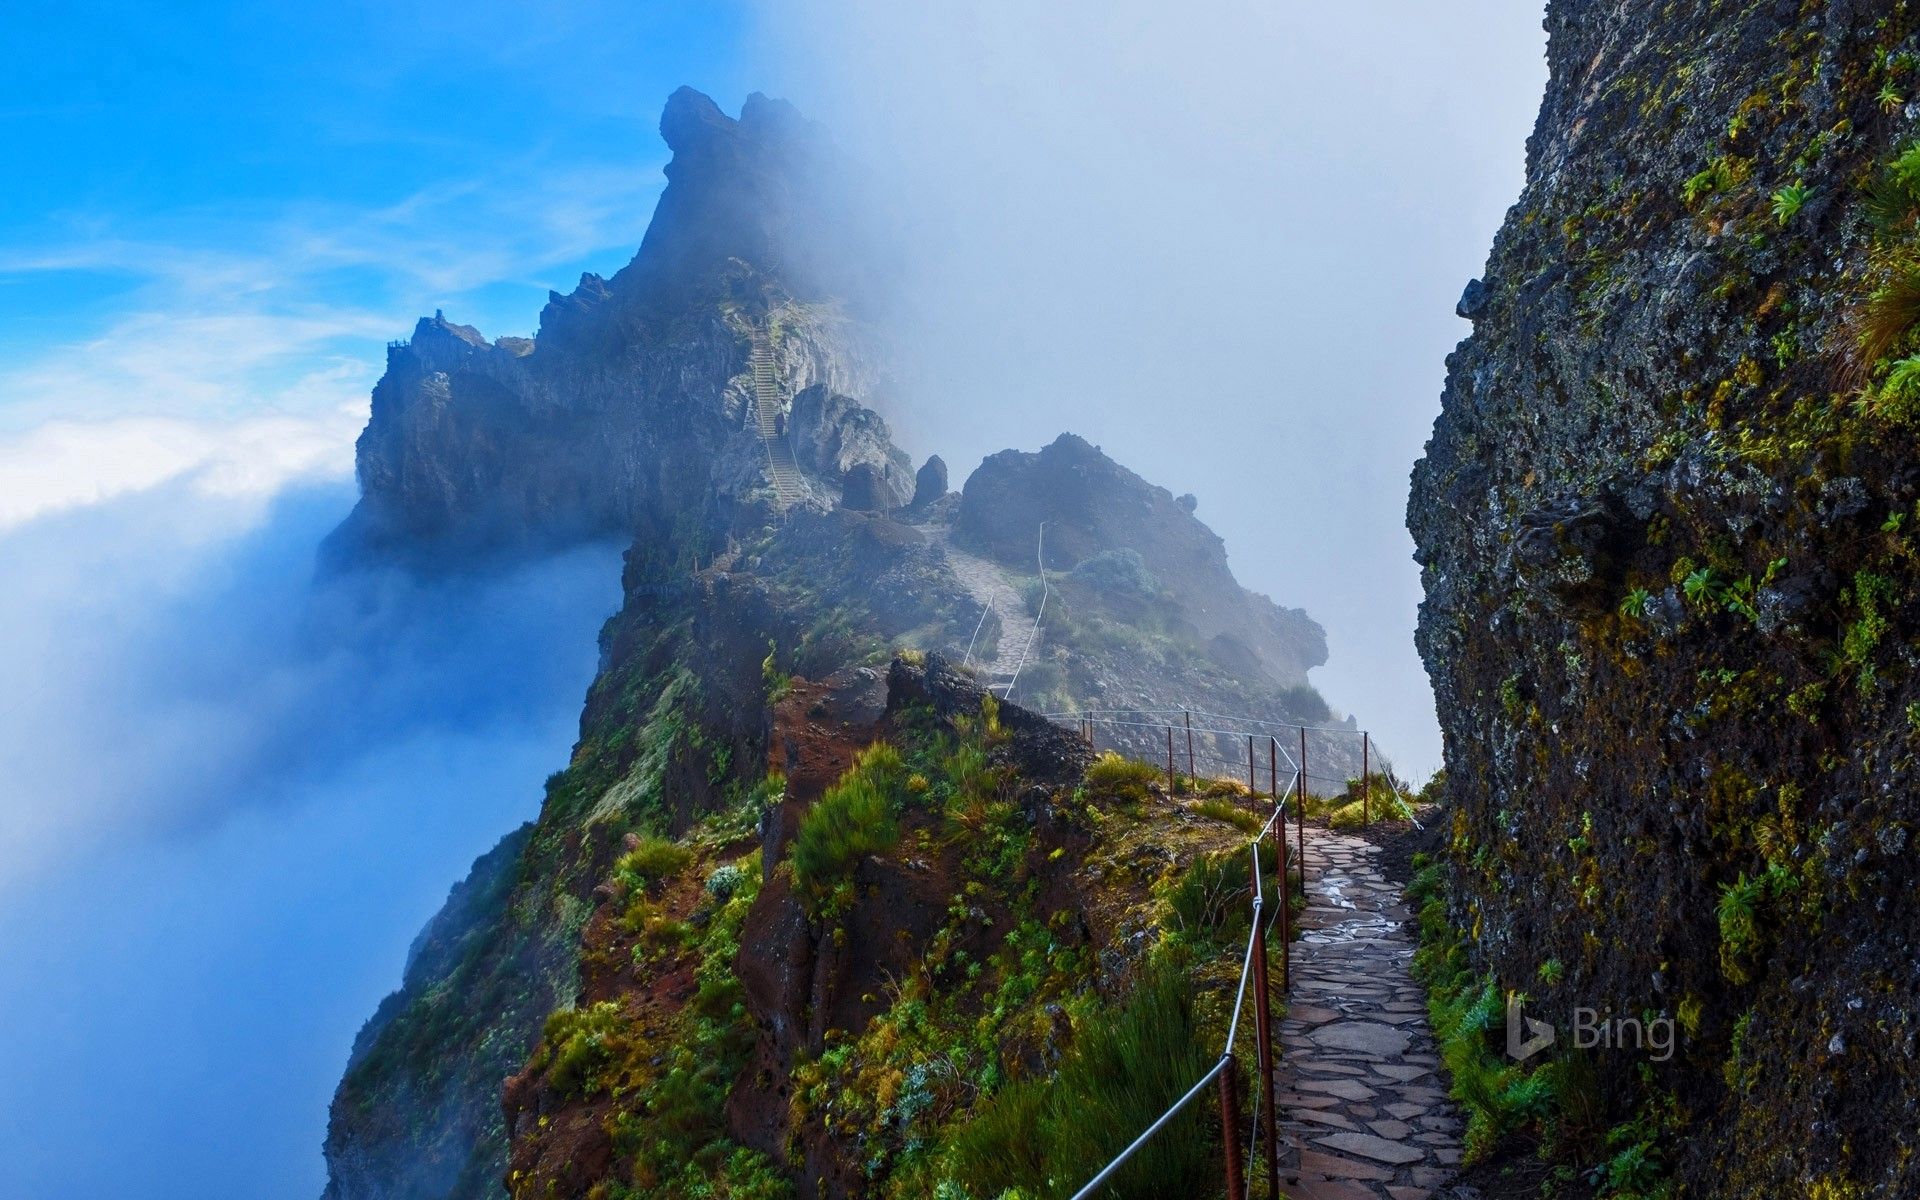 Mountain trail in Madeira, Portugal .com